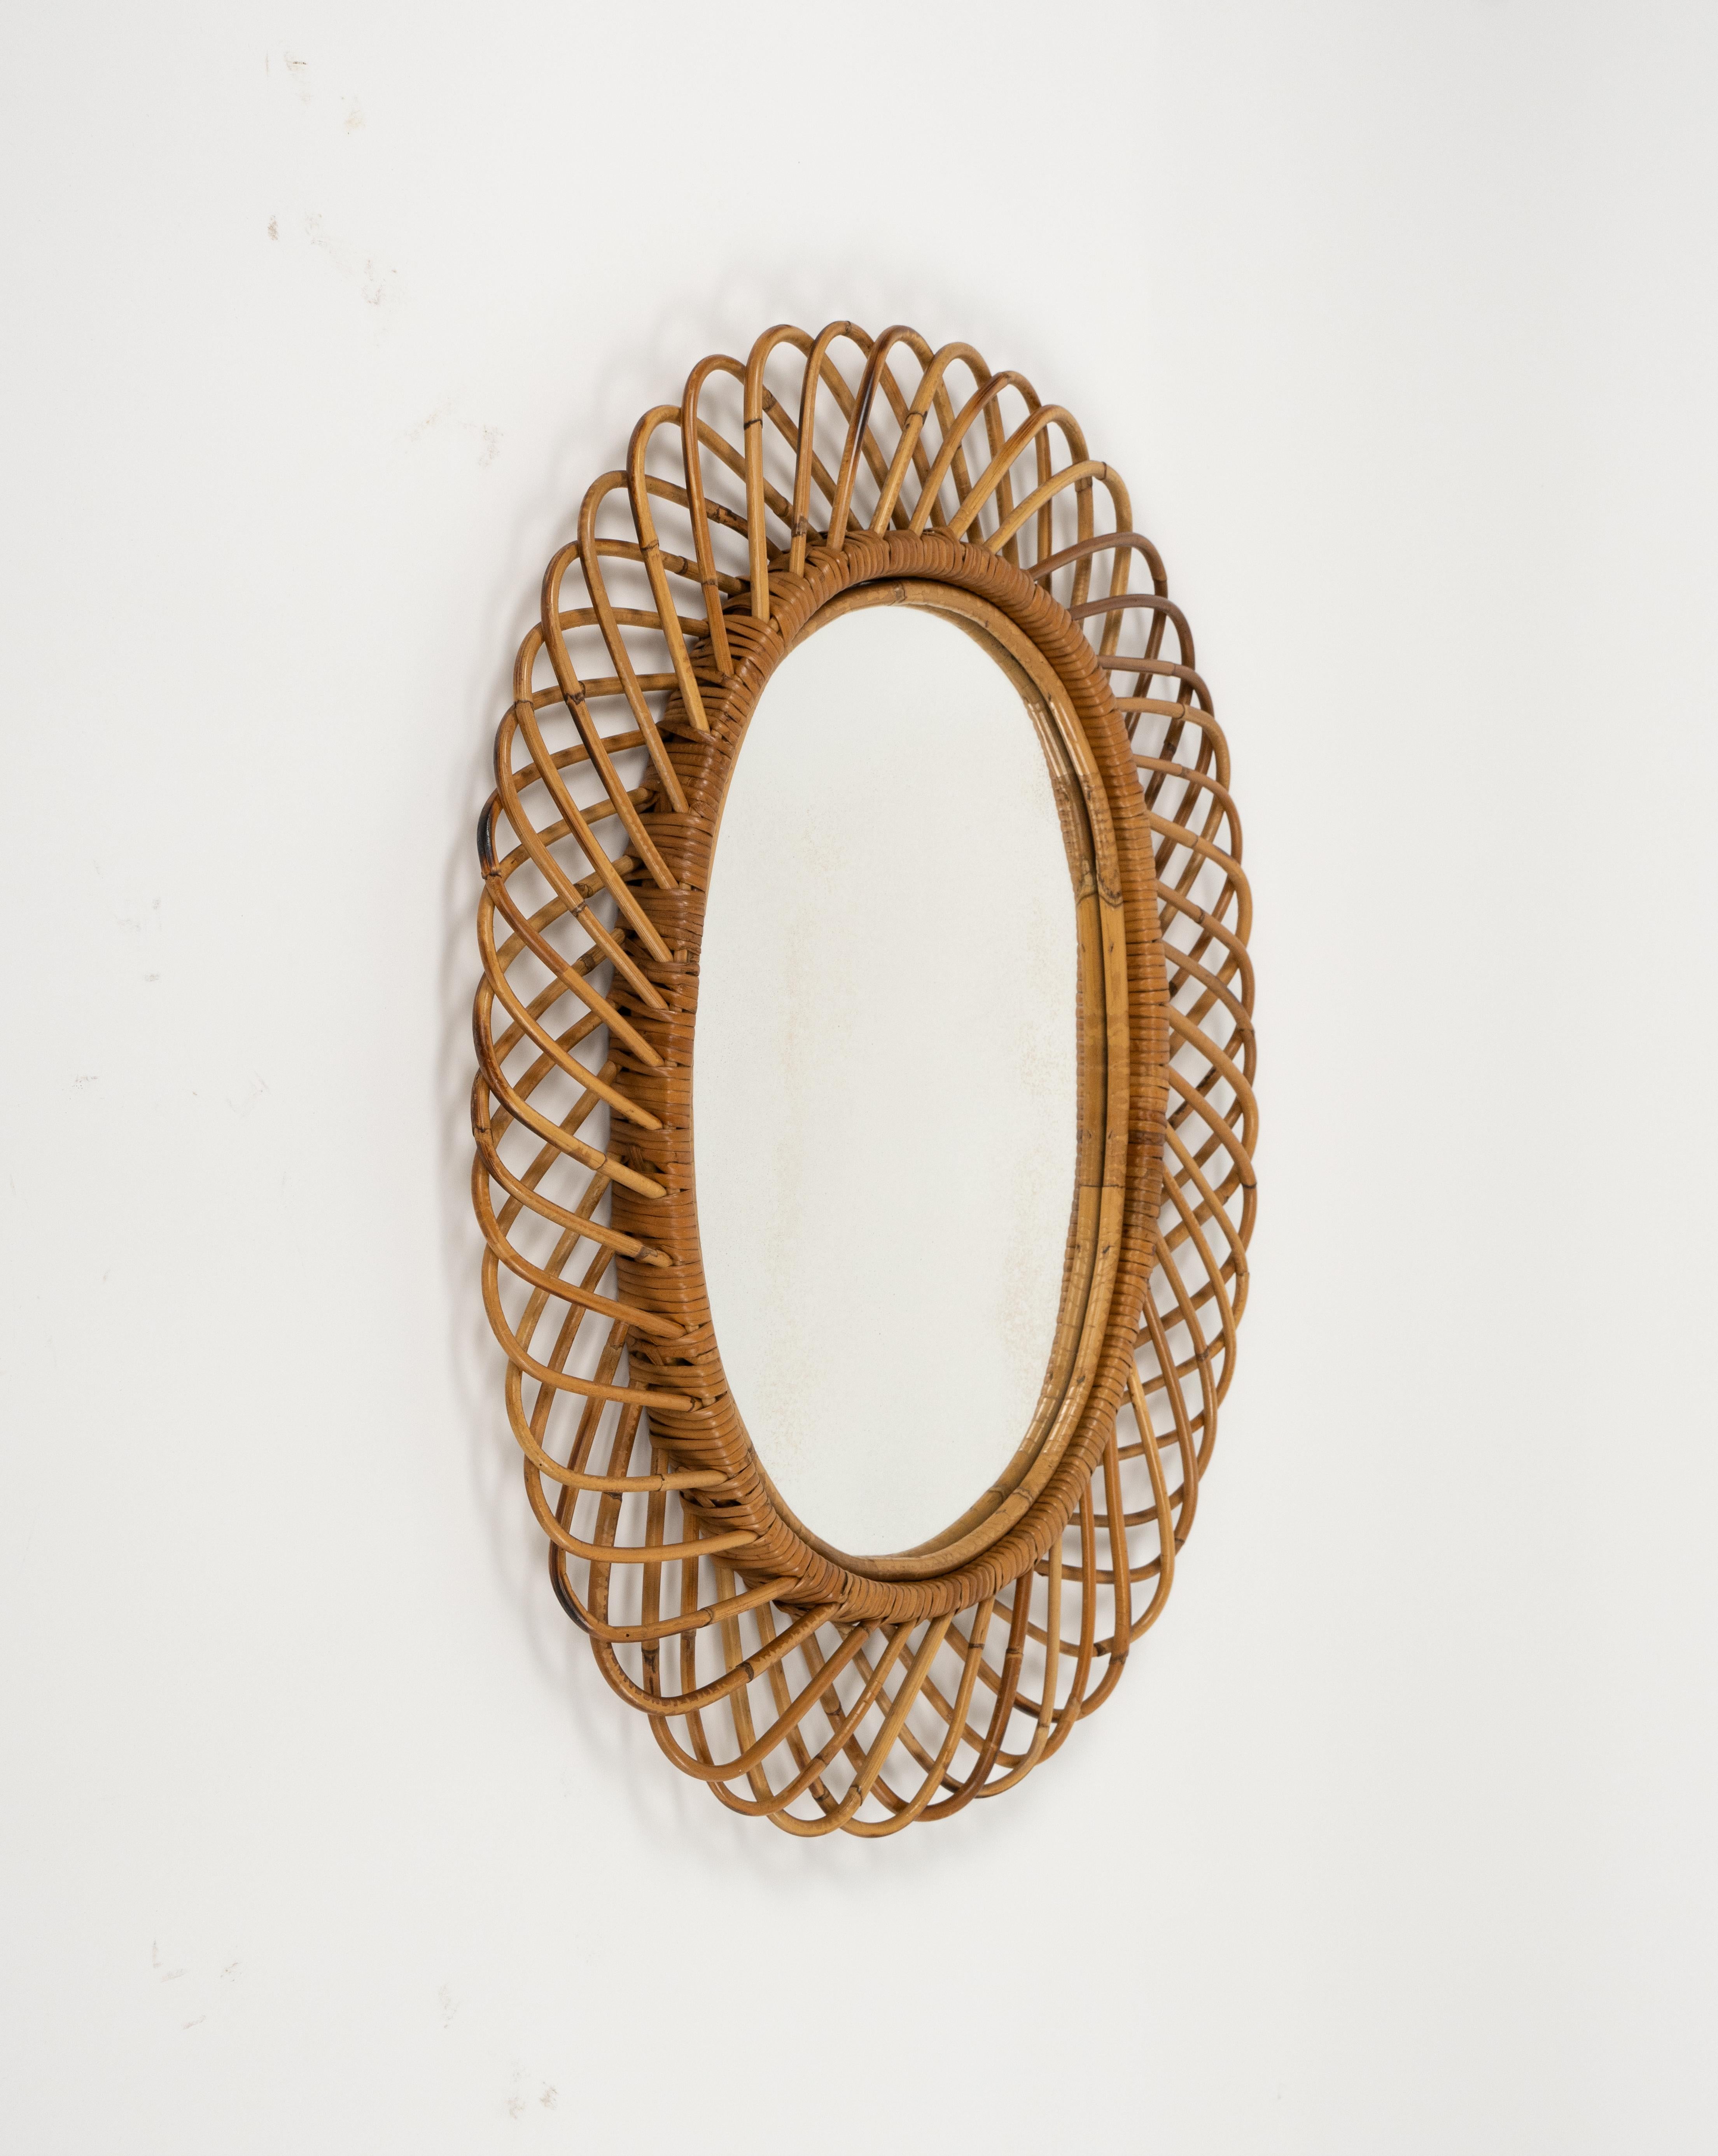 Midcentury Rattan and Bamboo Oval Wall Mirror by Franco Albini, Italy 1960s For Sale 4